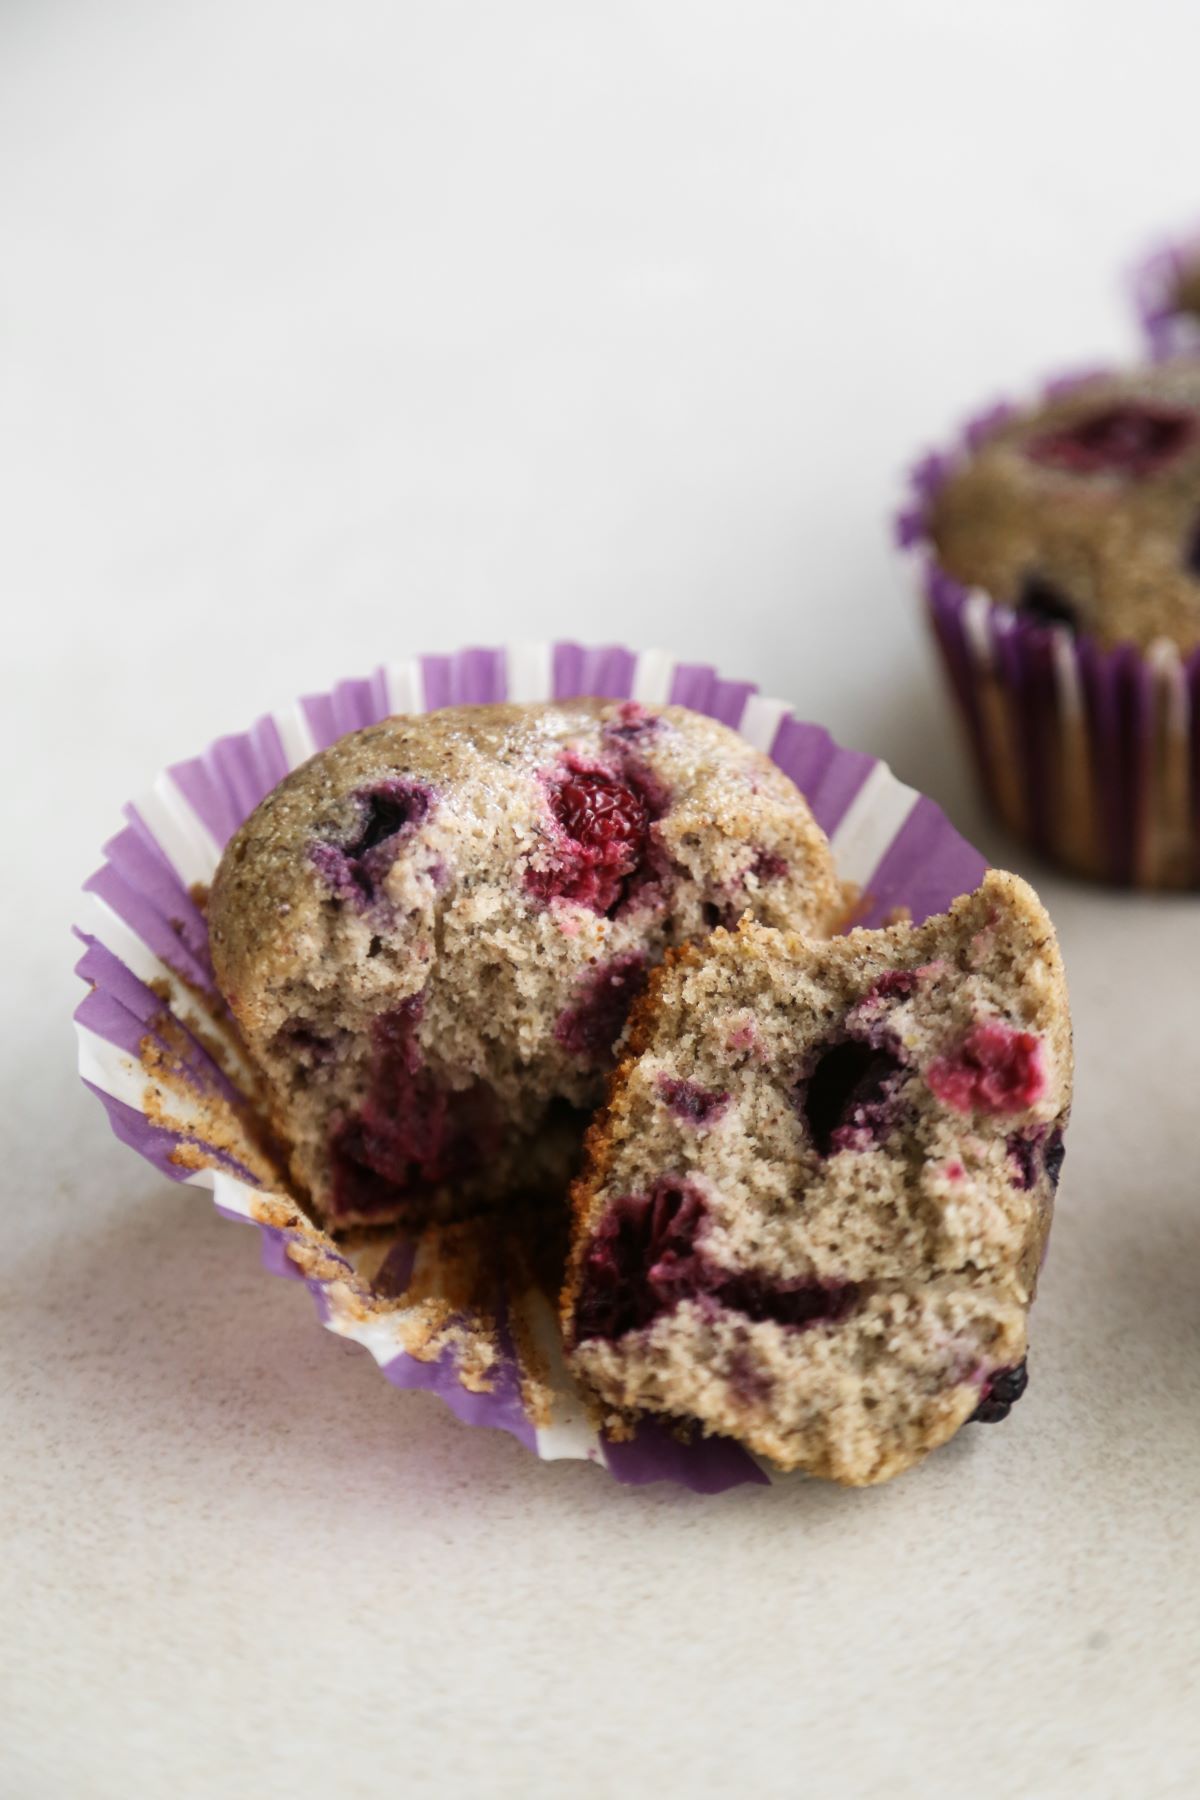 A muffin with mixed berry cut in half in a liner on a white surface.